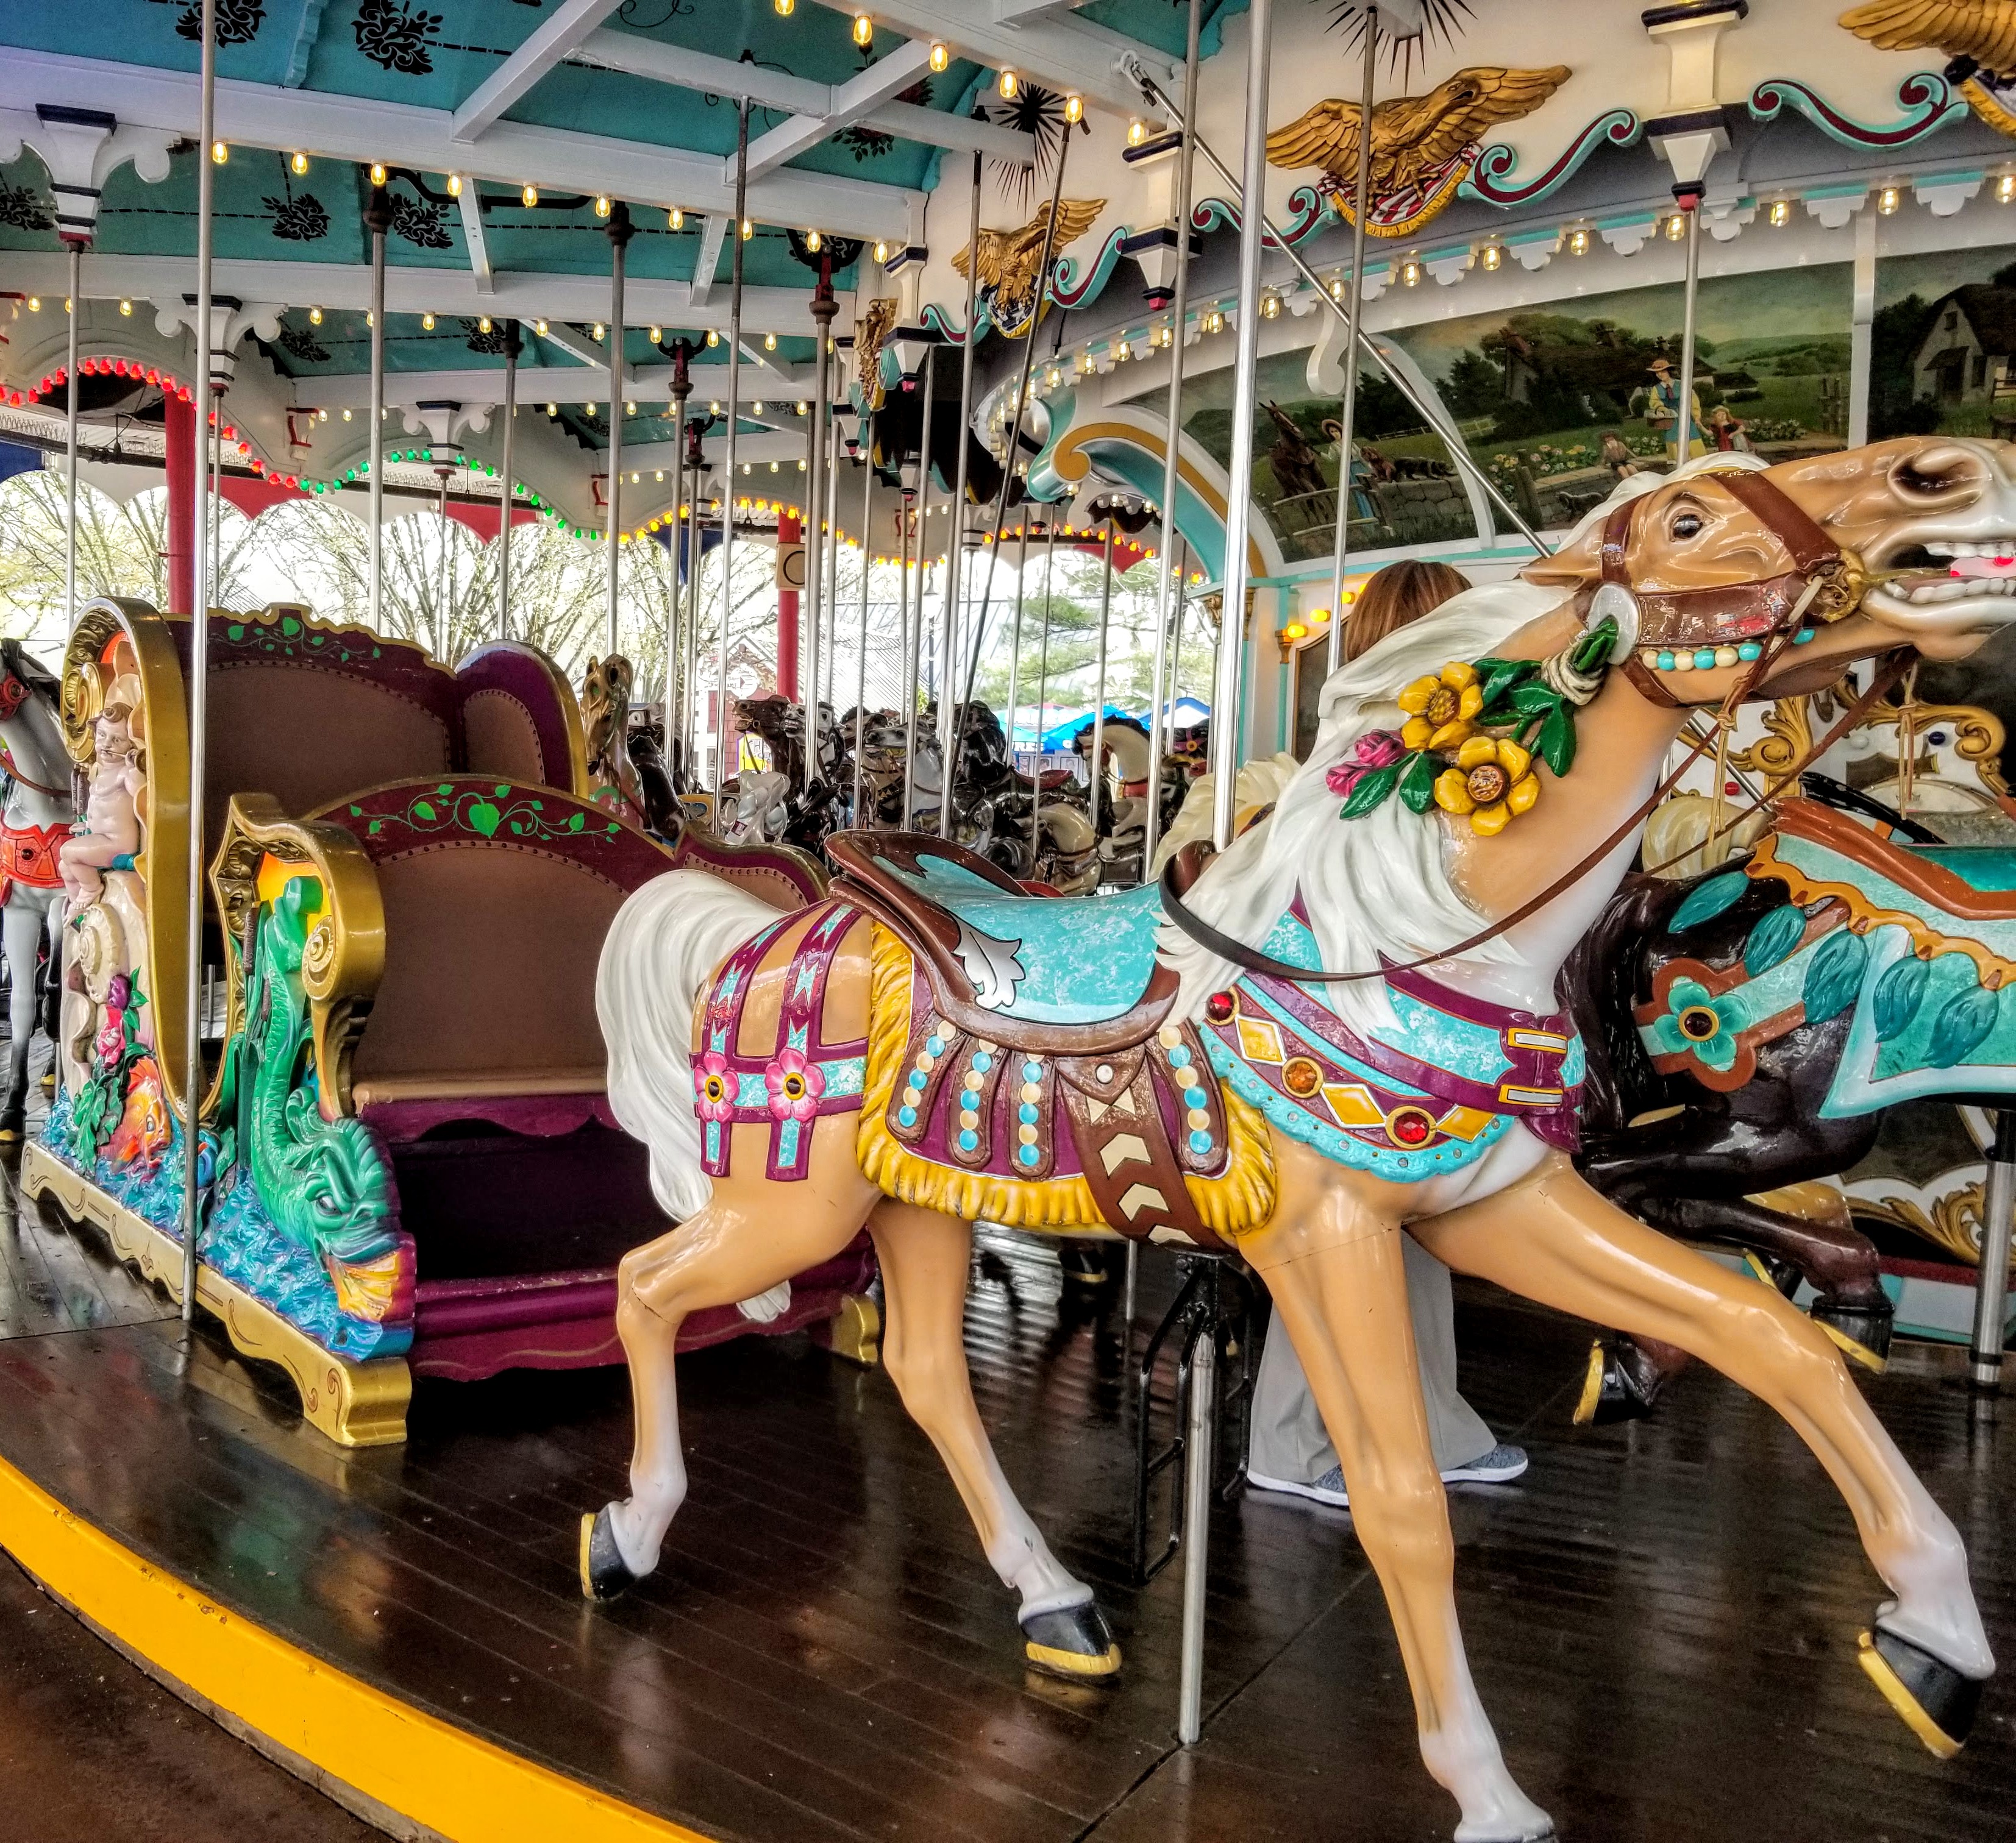 New and Fun Things To Do & Eat in HersheyPark- Hershey, Pa.? #SweetWelcome The HersheyPark Carrousel has an ADA approved horse and carriage.